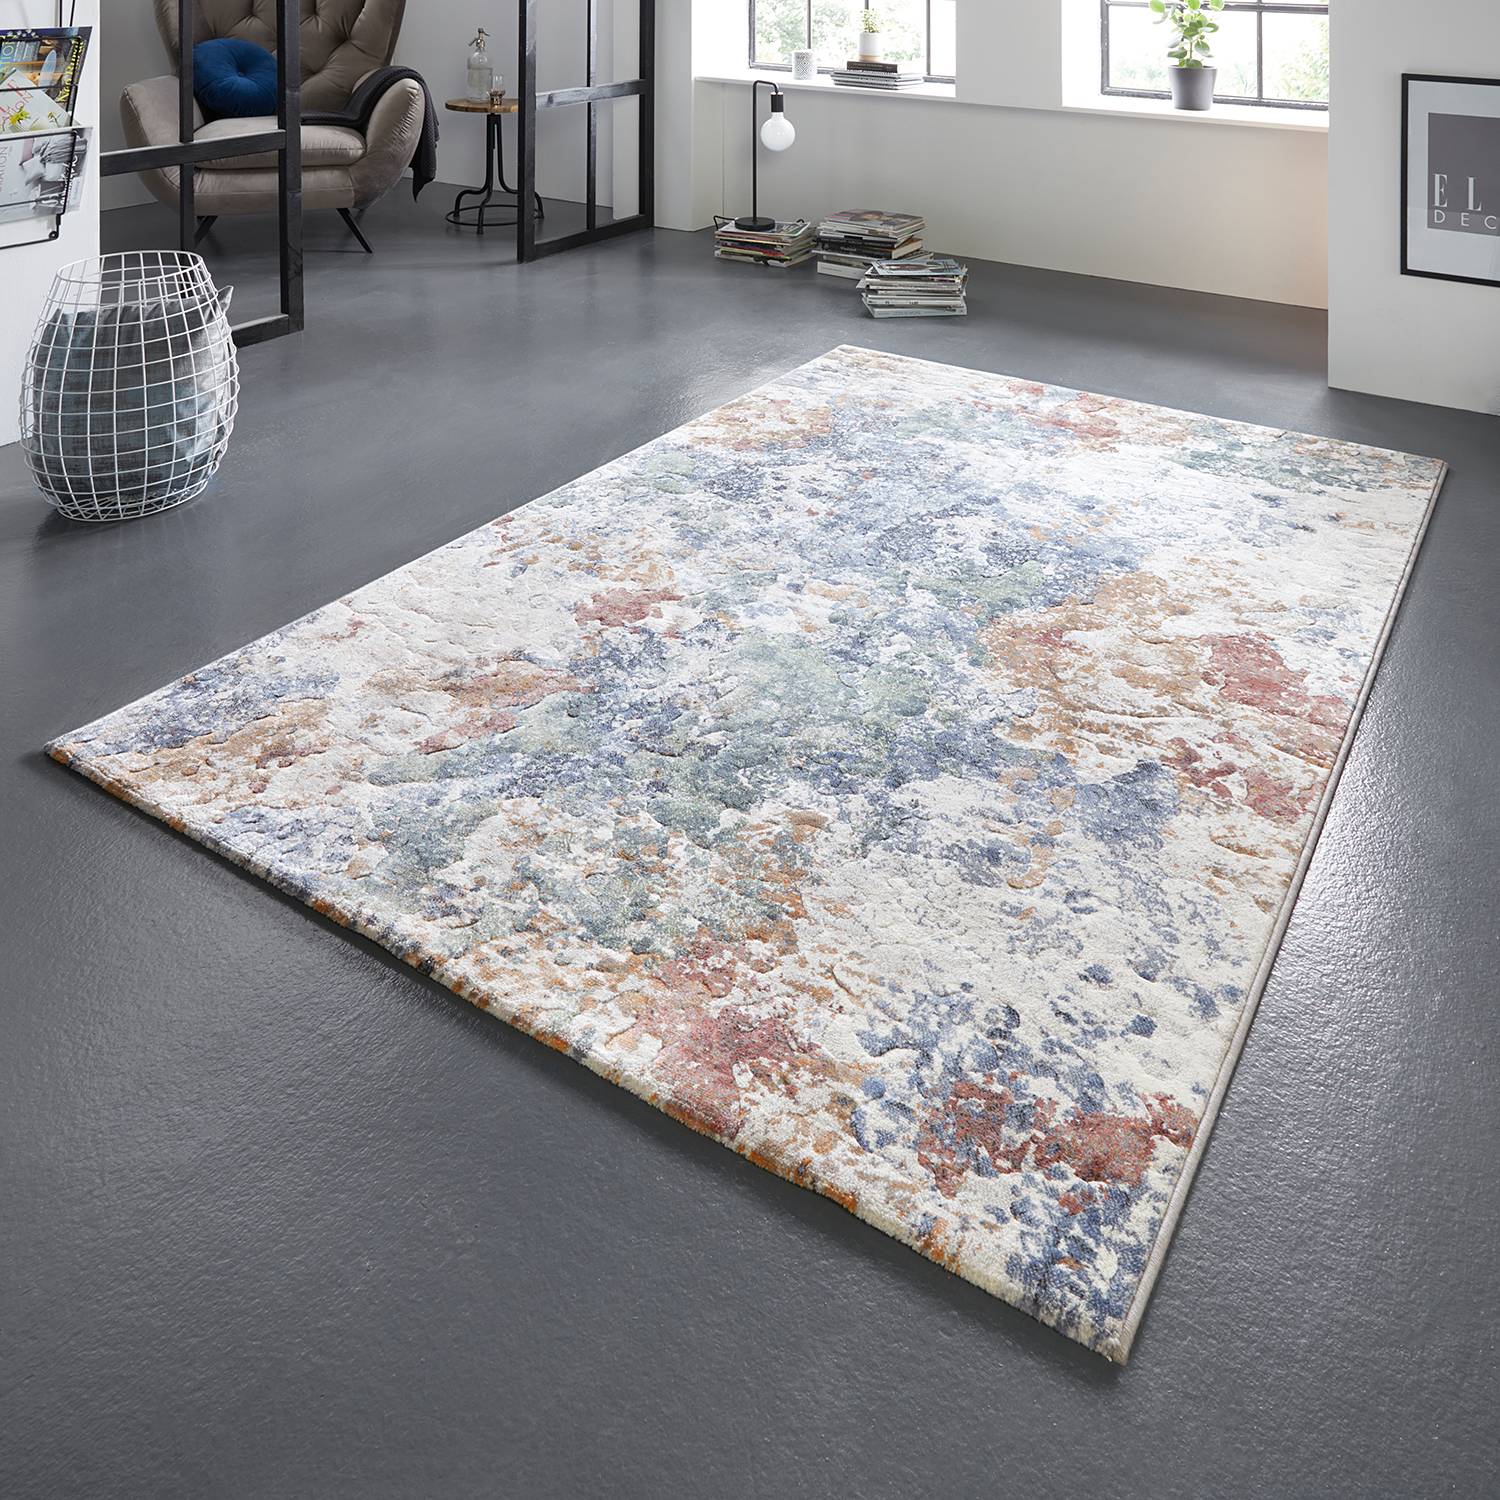 Image of Tapis Fontaine 000000001000168255